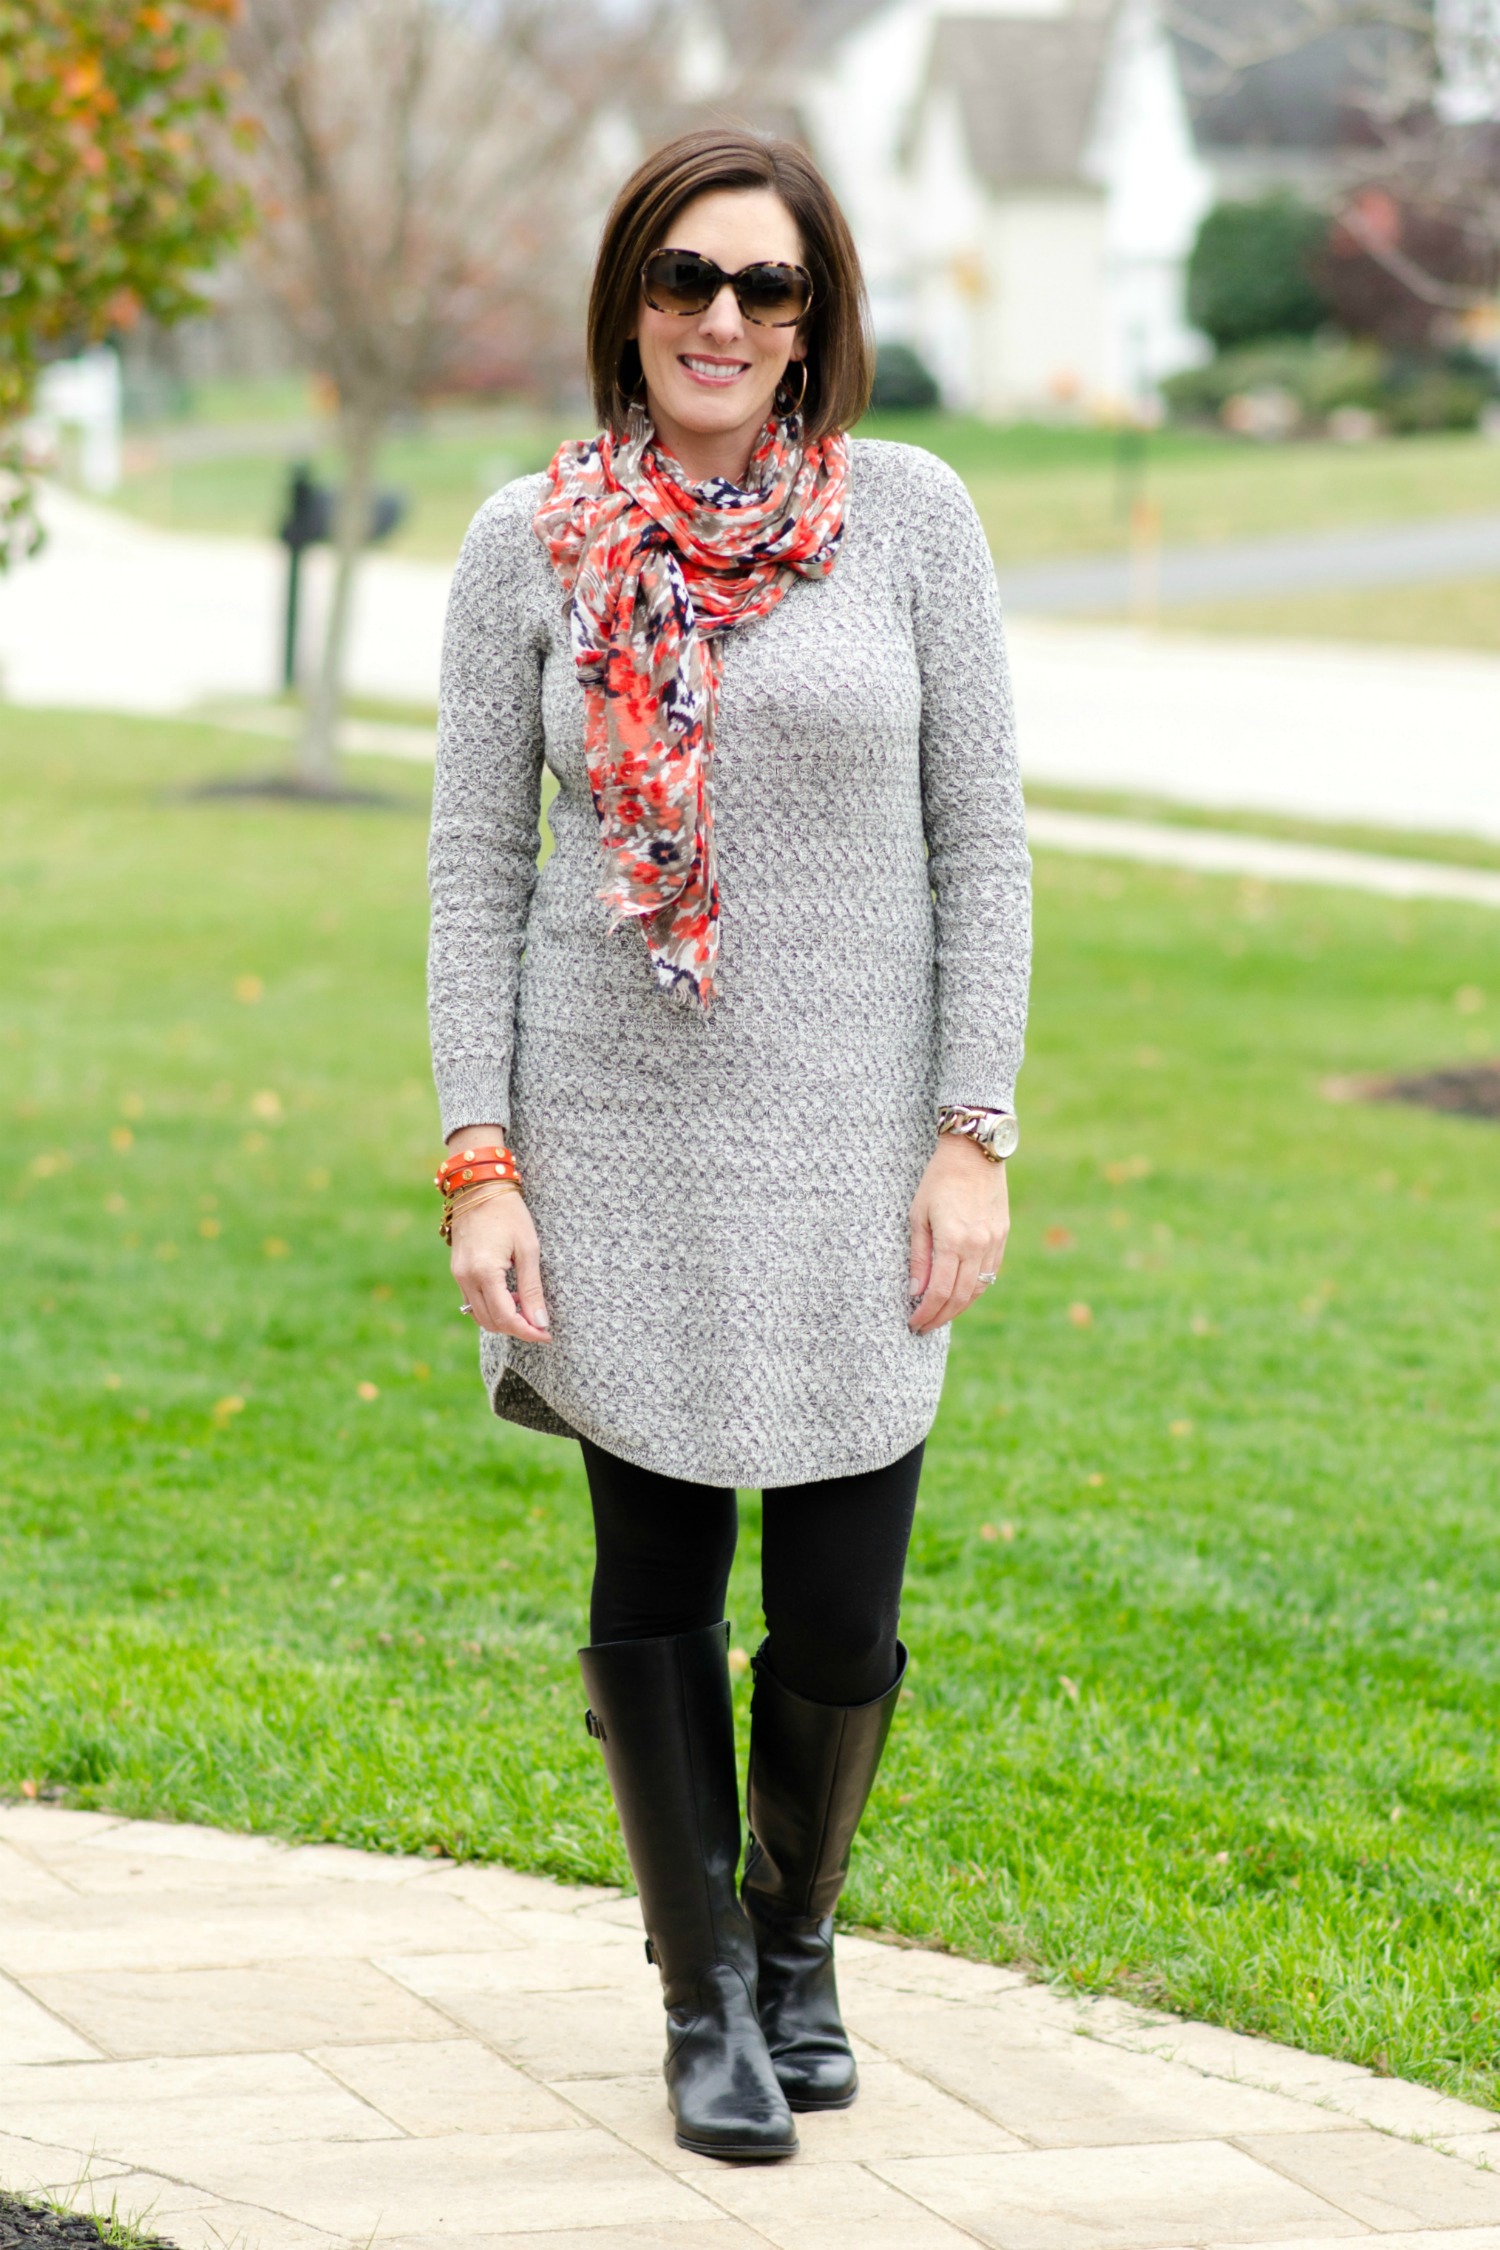 Fashion Advice for Women Over 40: How to Wear Legging with a Sweater Dress